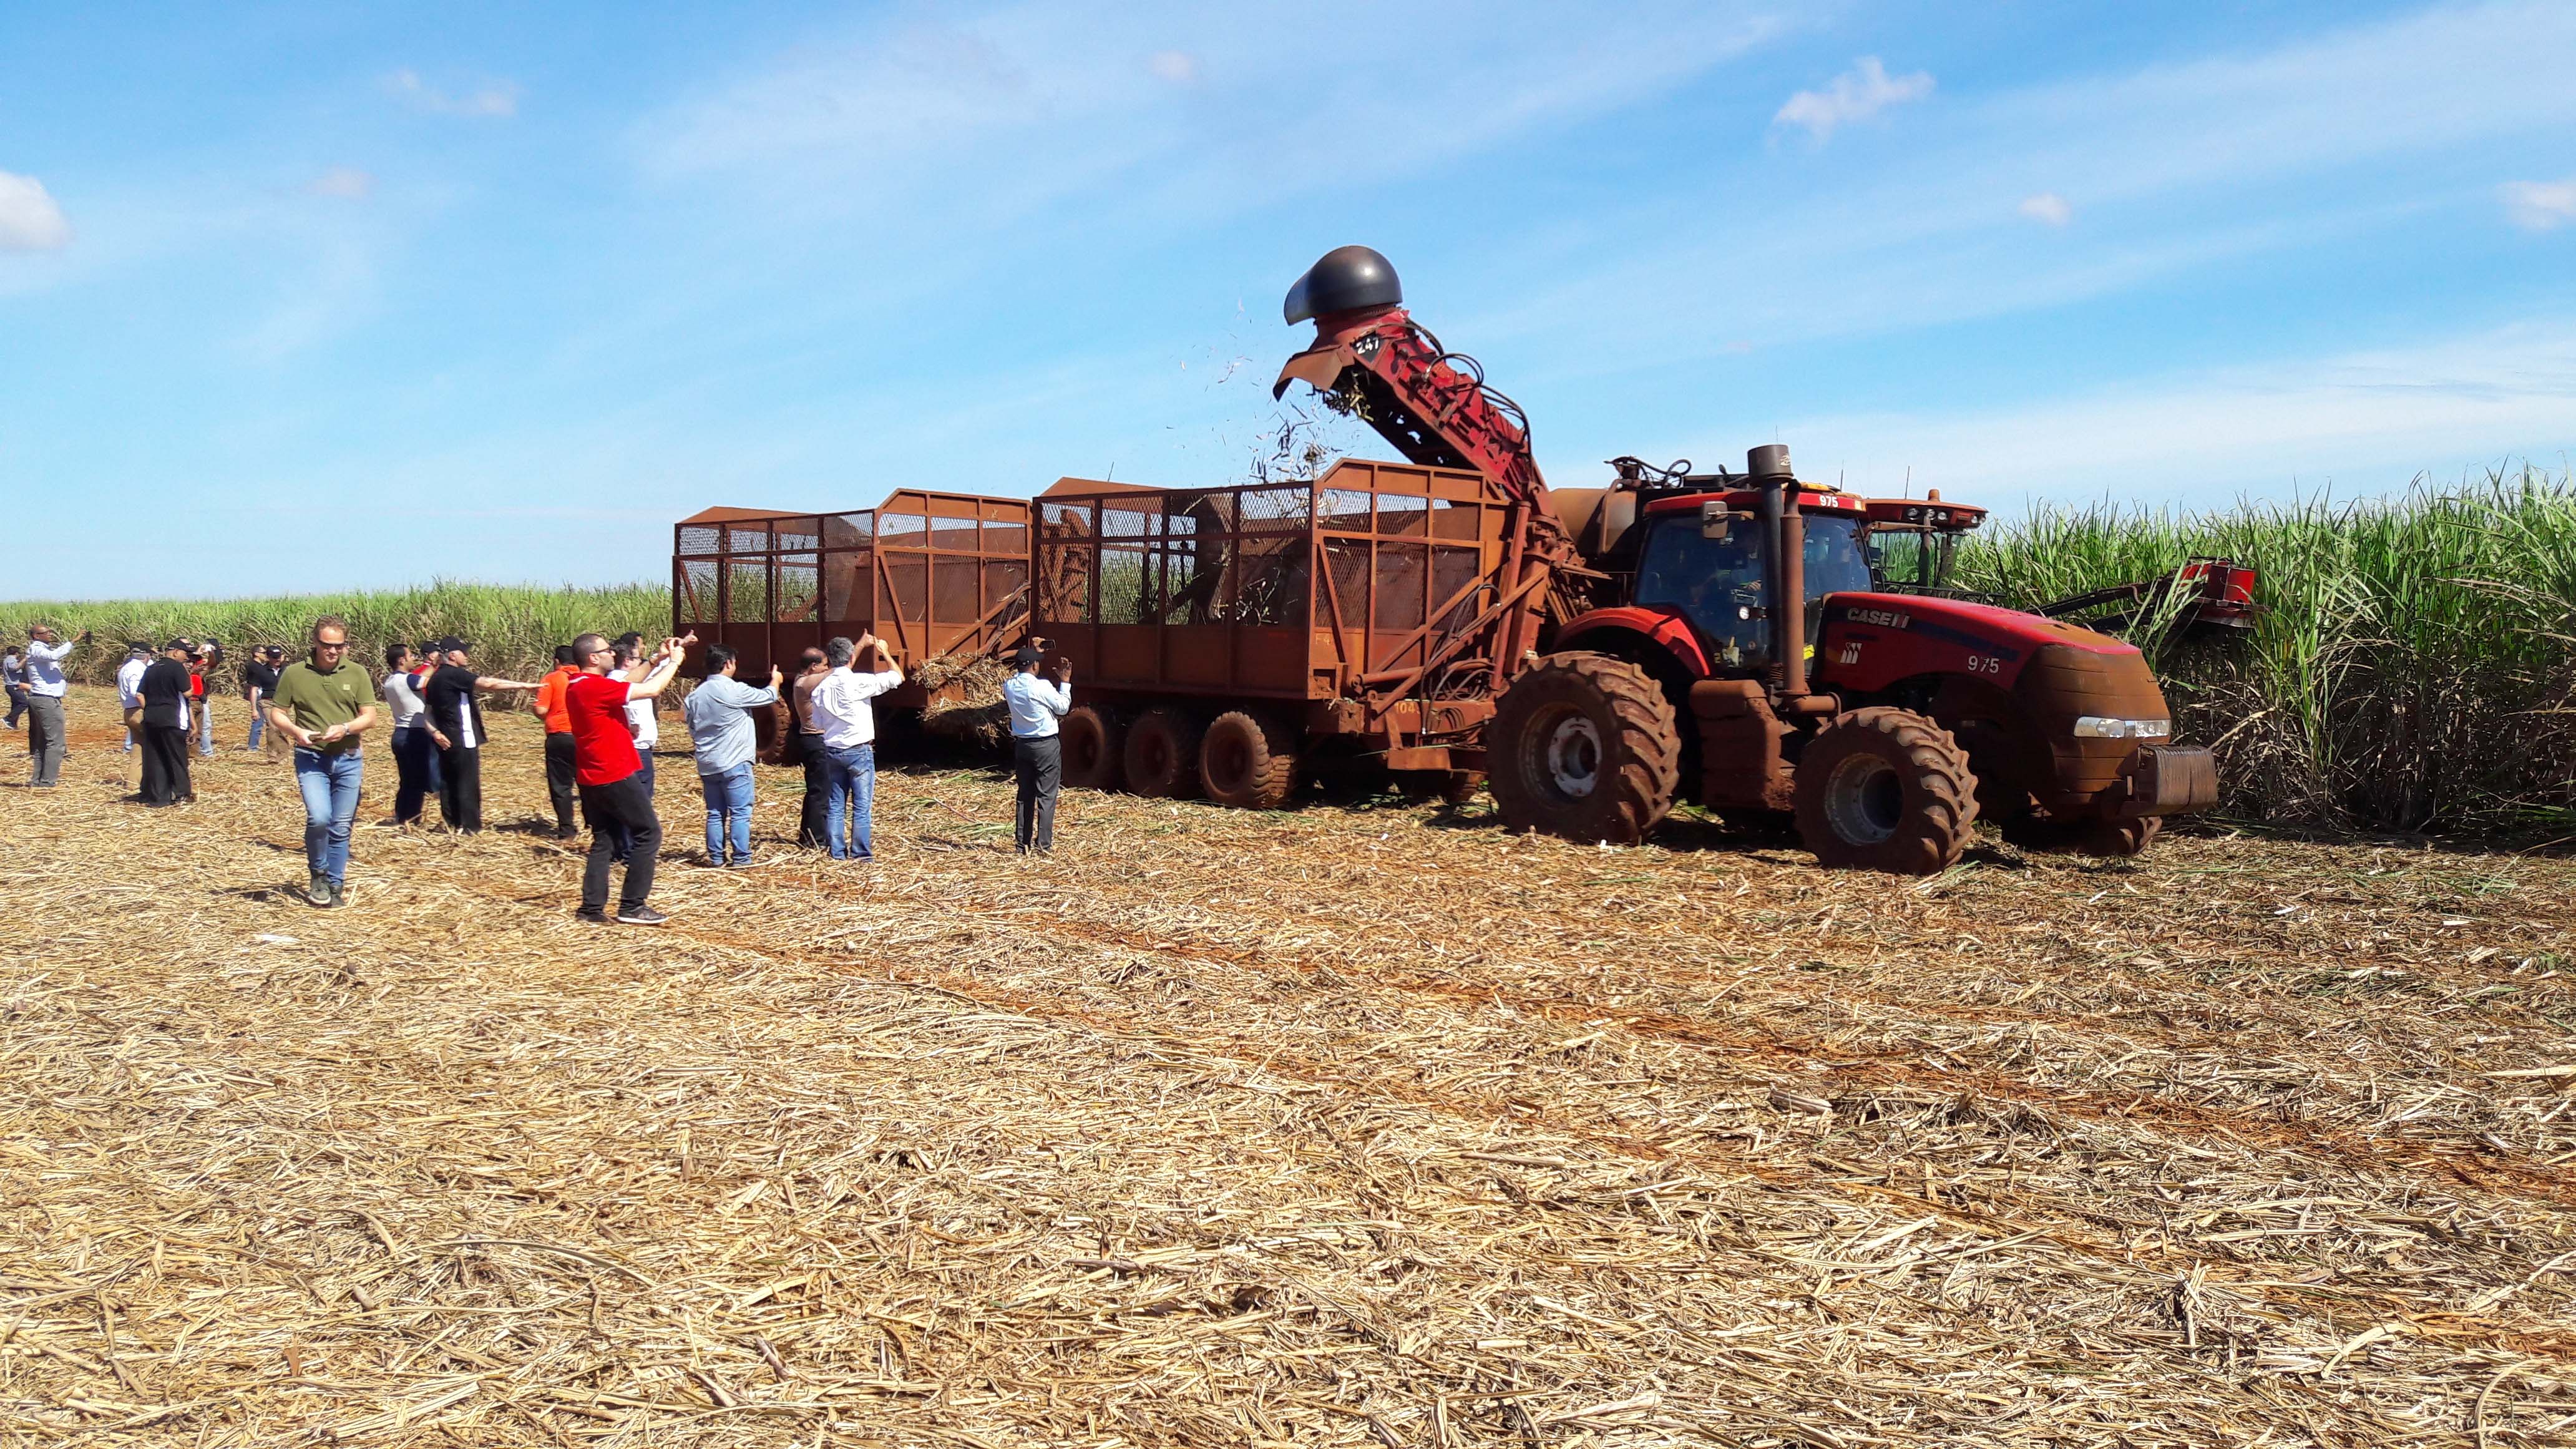 CASE IH SUGAR CAMP 2017 GIVES INSIGHTS INTO THE WORLDS LARGEST SUGARCANE PRODUCER